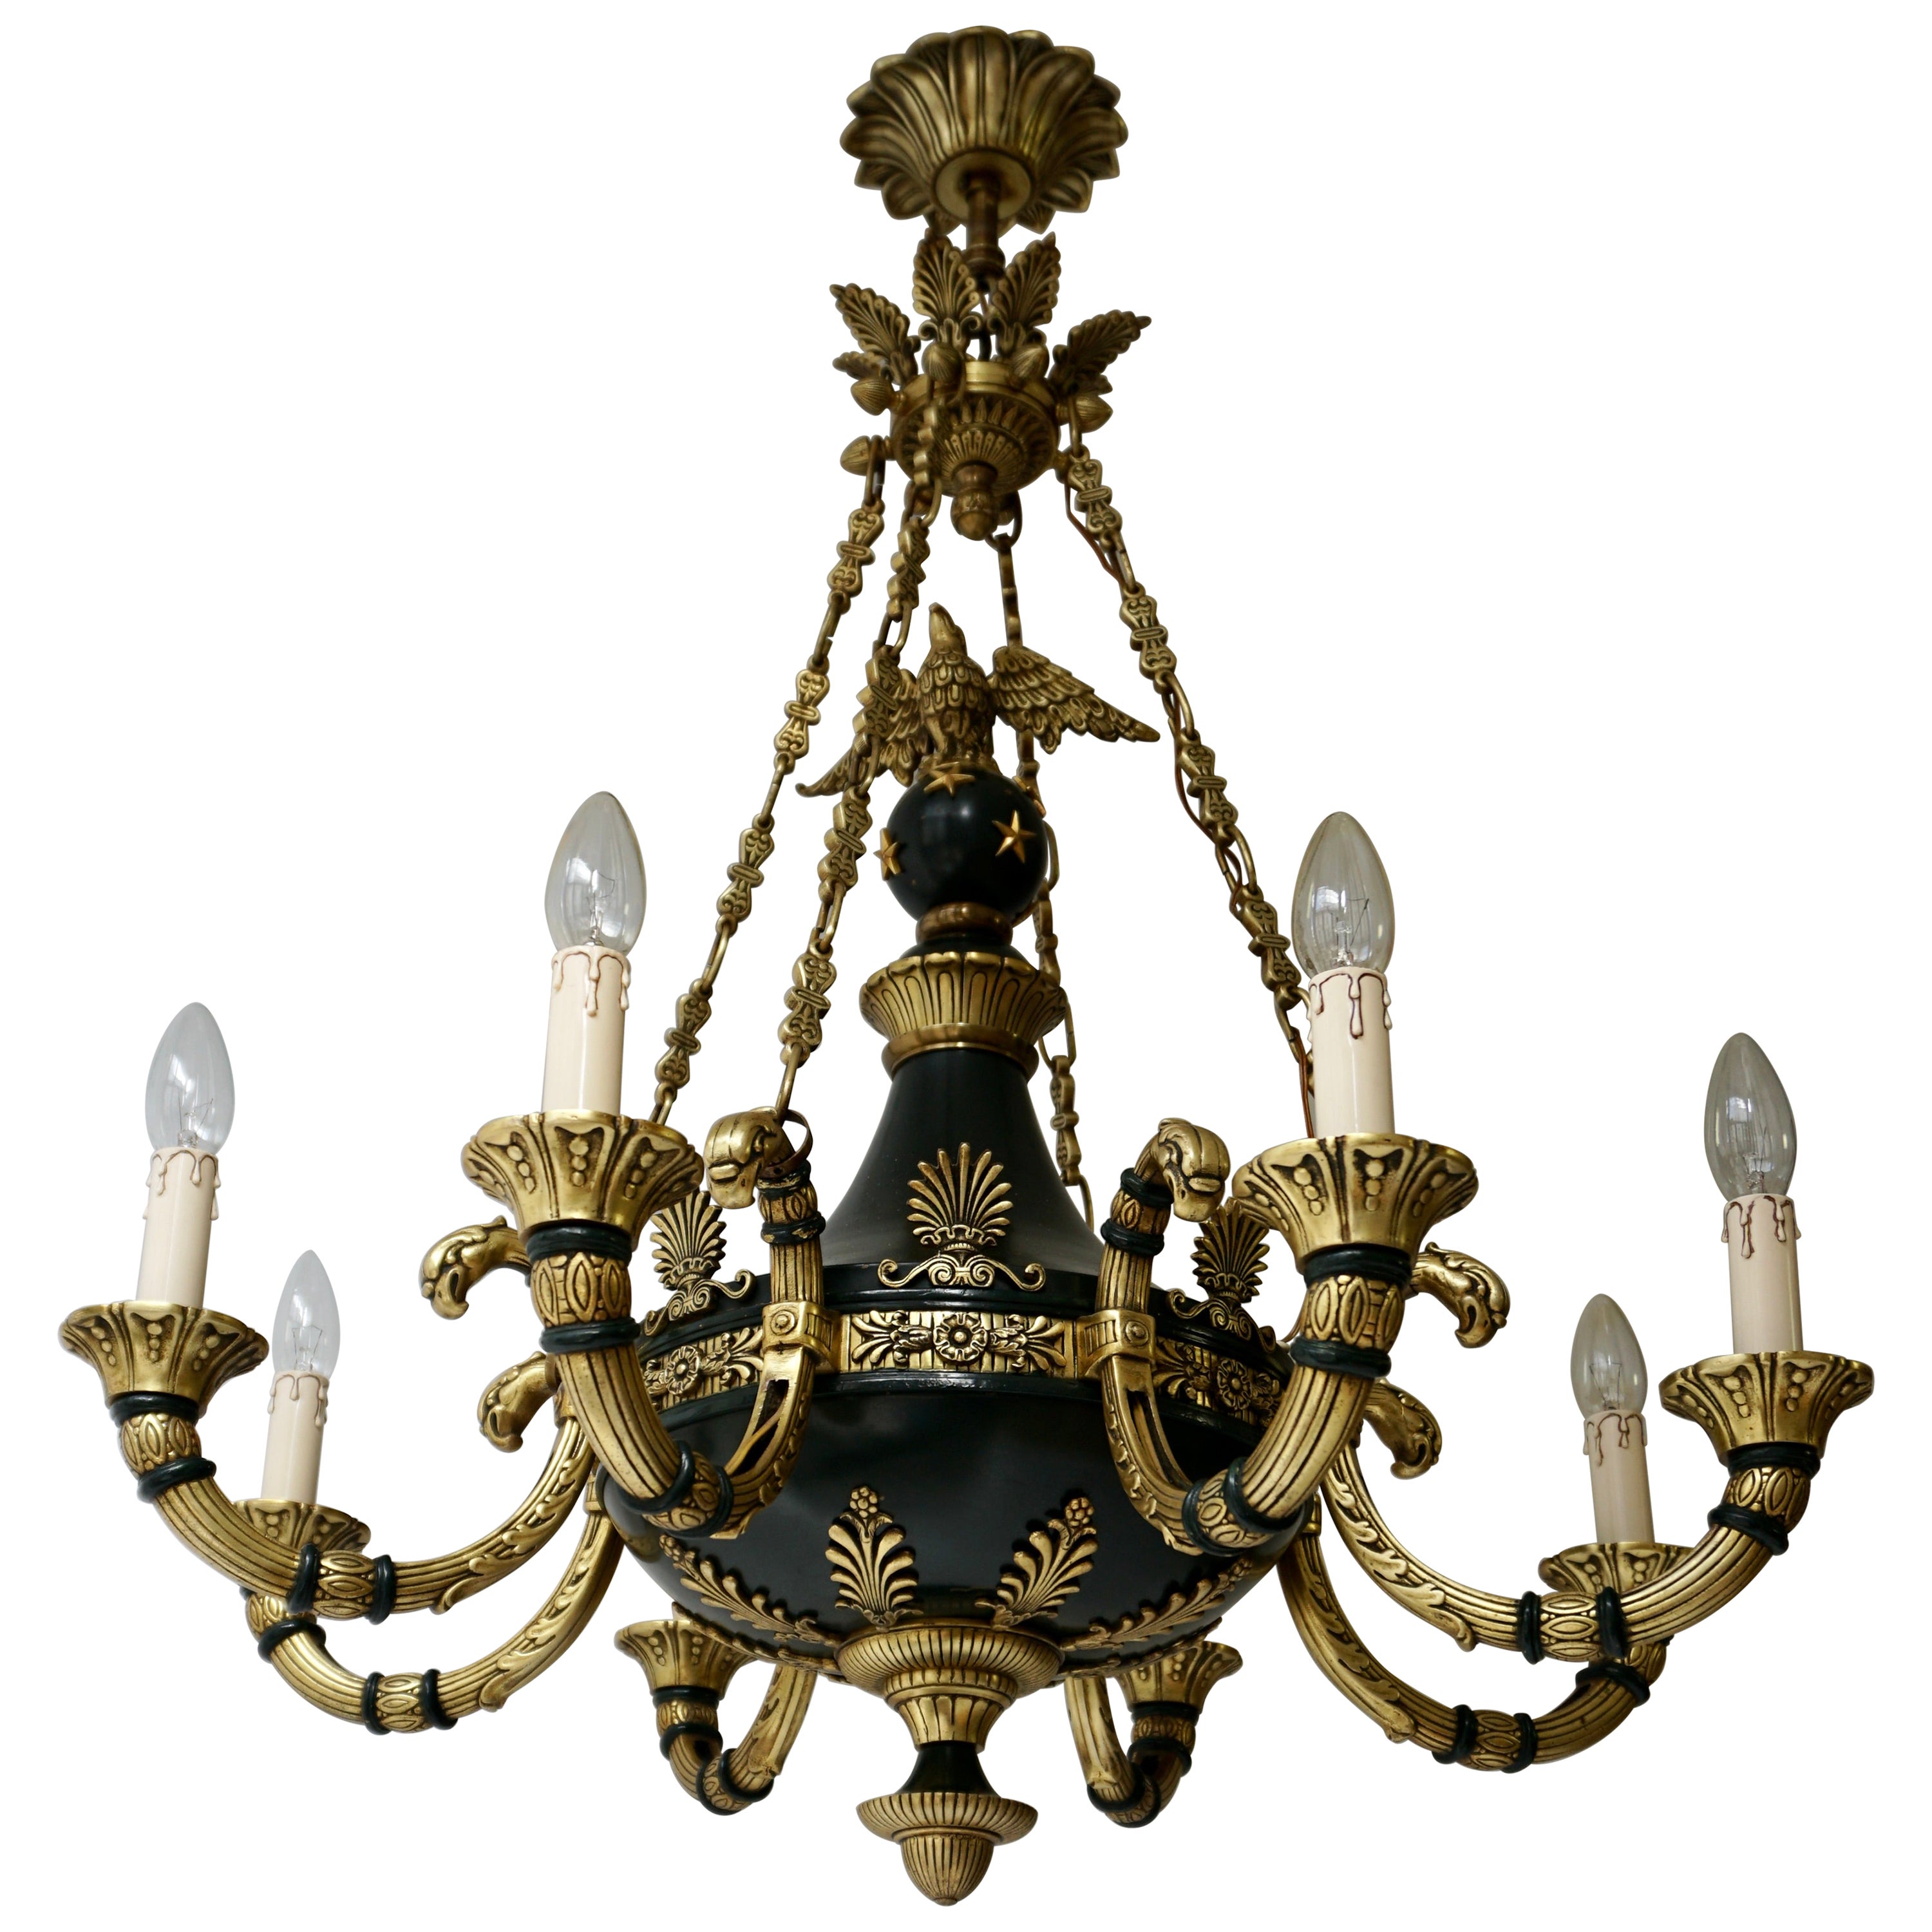 Antique French Empire Style Neoclassical Gilt and Patina Bronze Eagle Chandelier